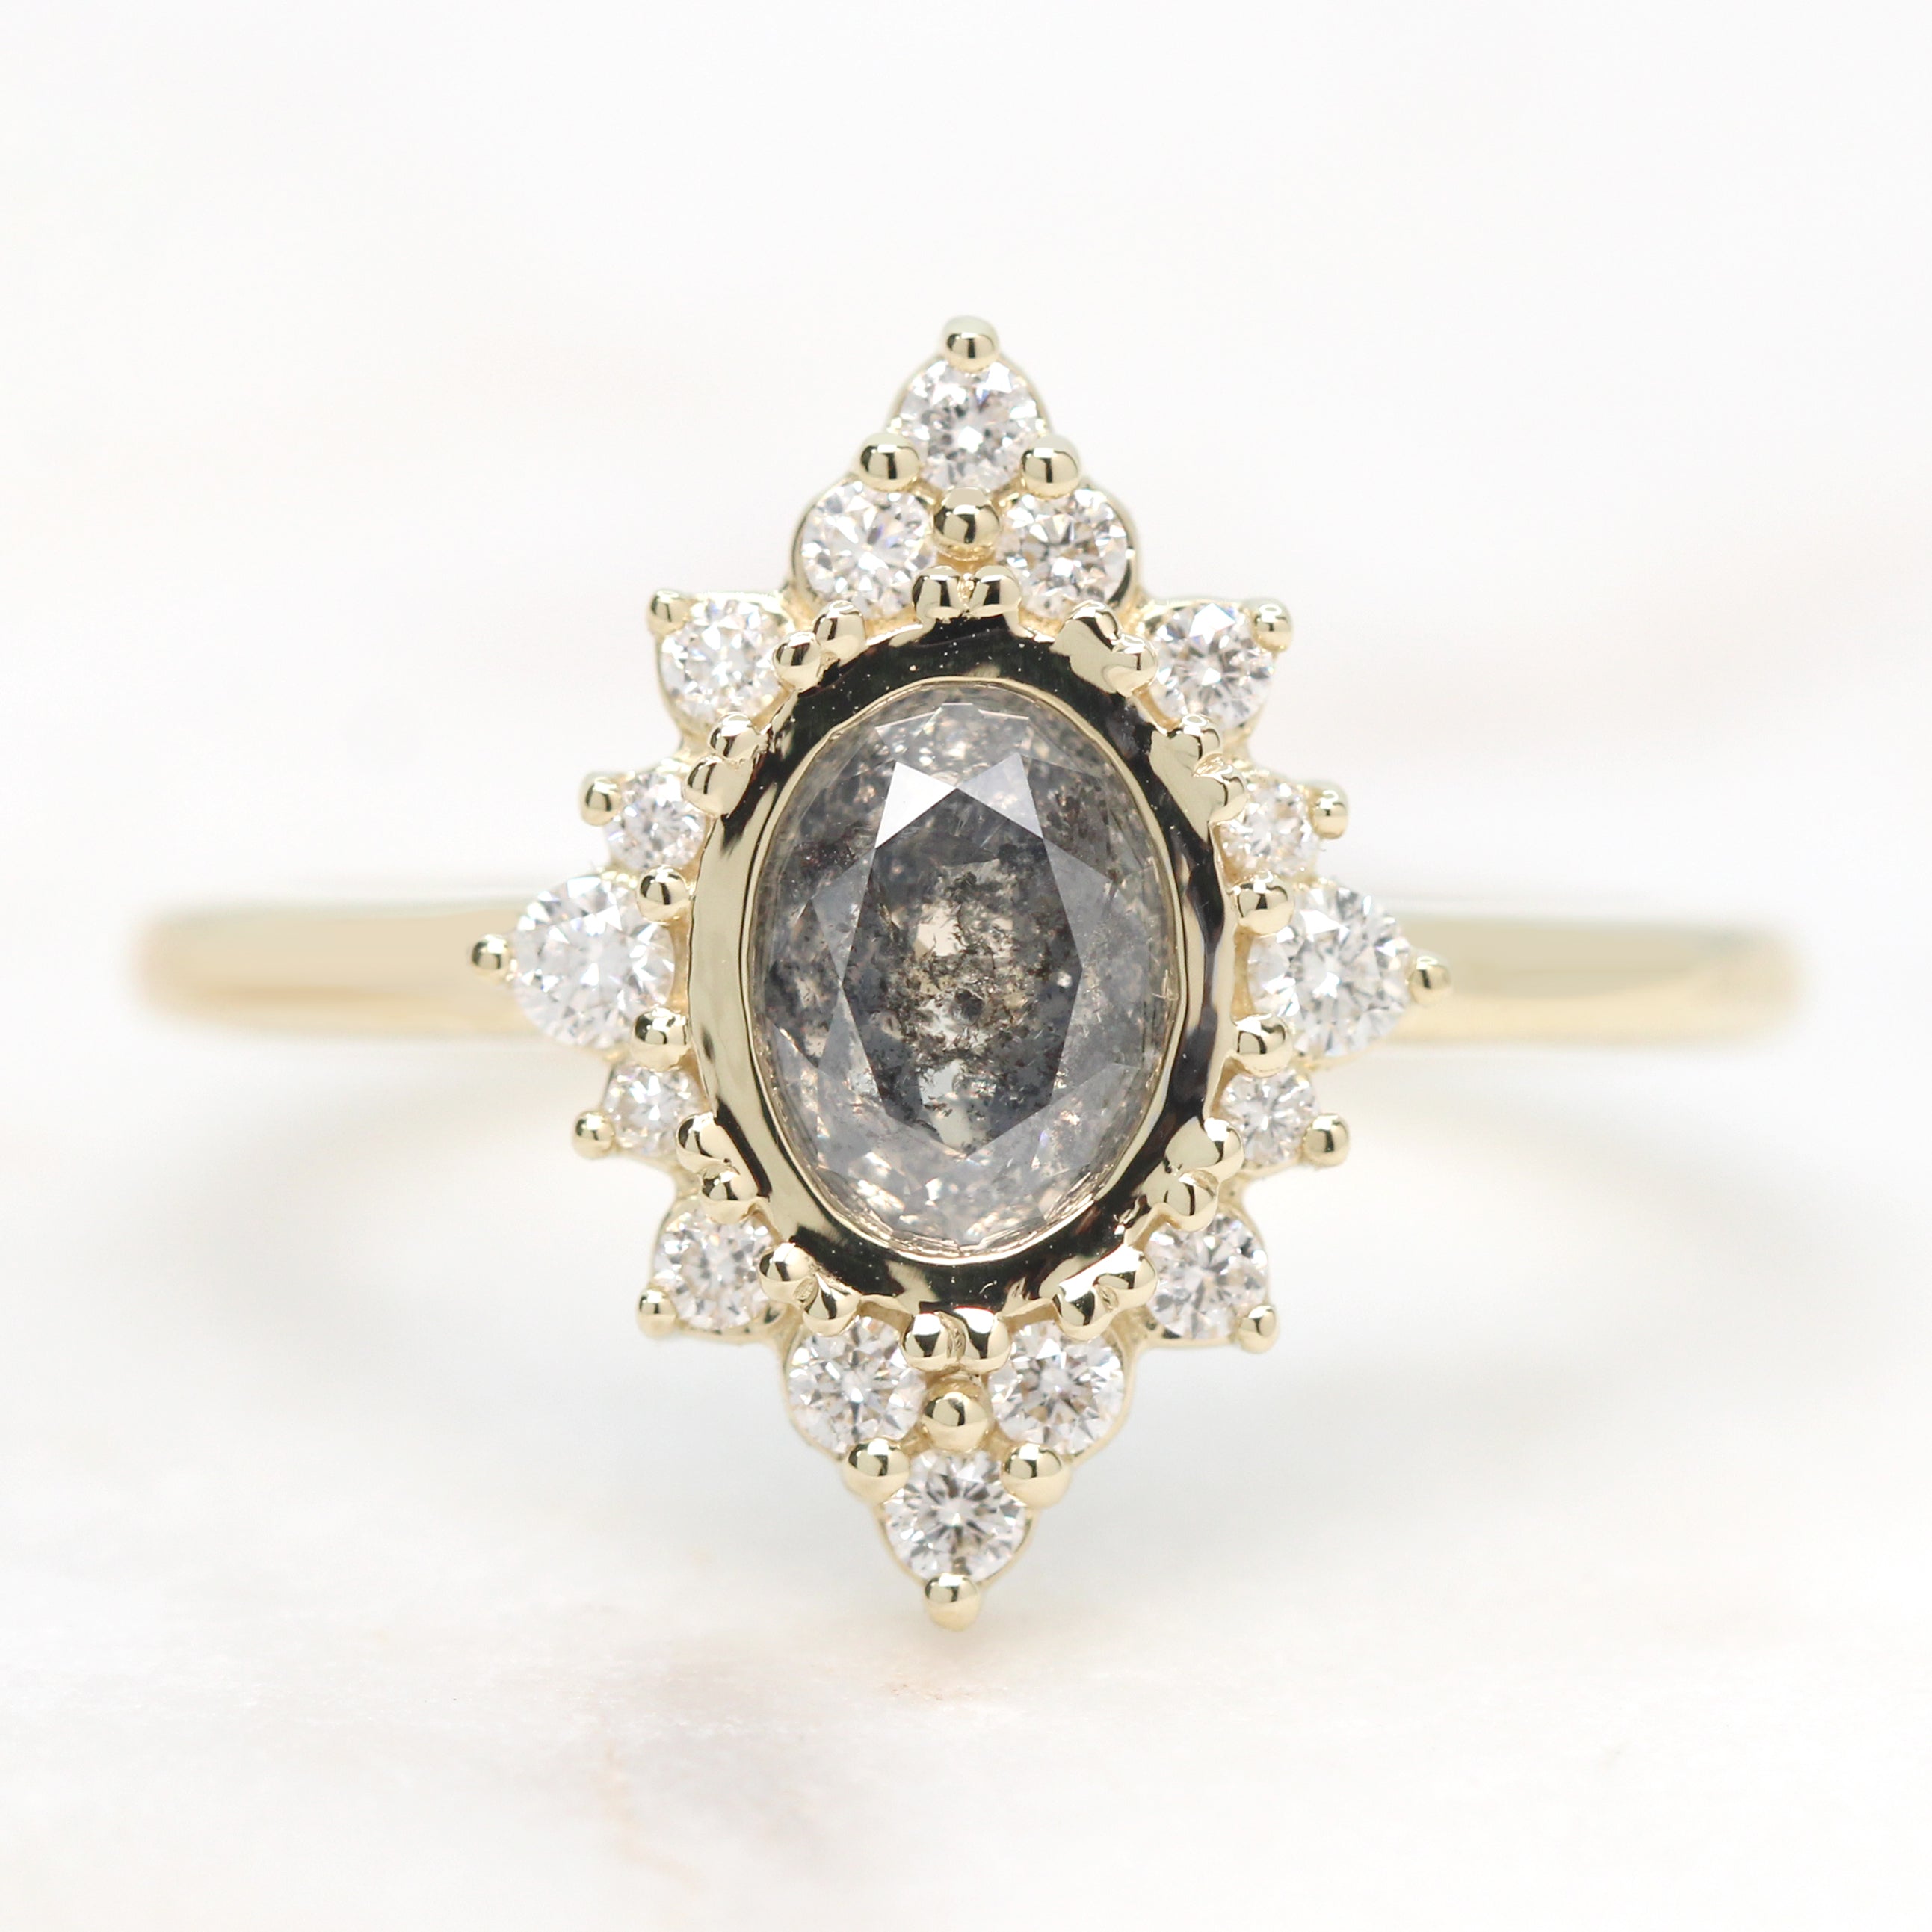 Estrella Ring with a 1.04 Carat Dark Gray Oval Celestial Diamond and White Accent Diamonds in 14k Yellow Gold - Ready to Size and Ship - Midwinter Co. Alternative Bridal Rings and Modern Fine Jewelry